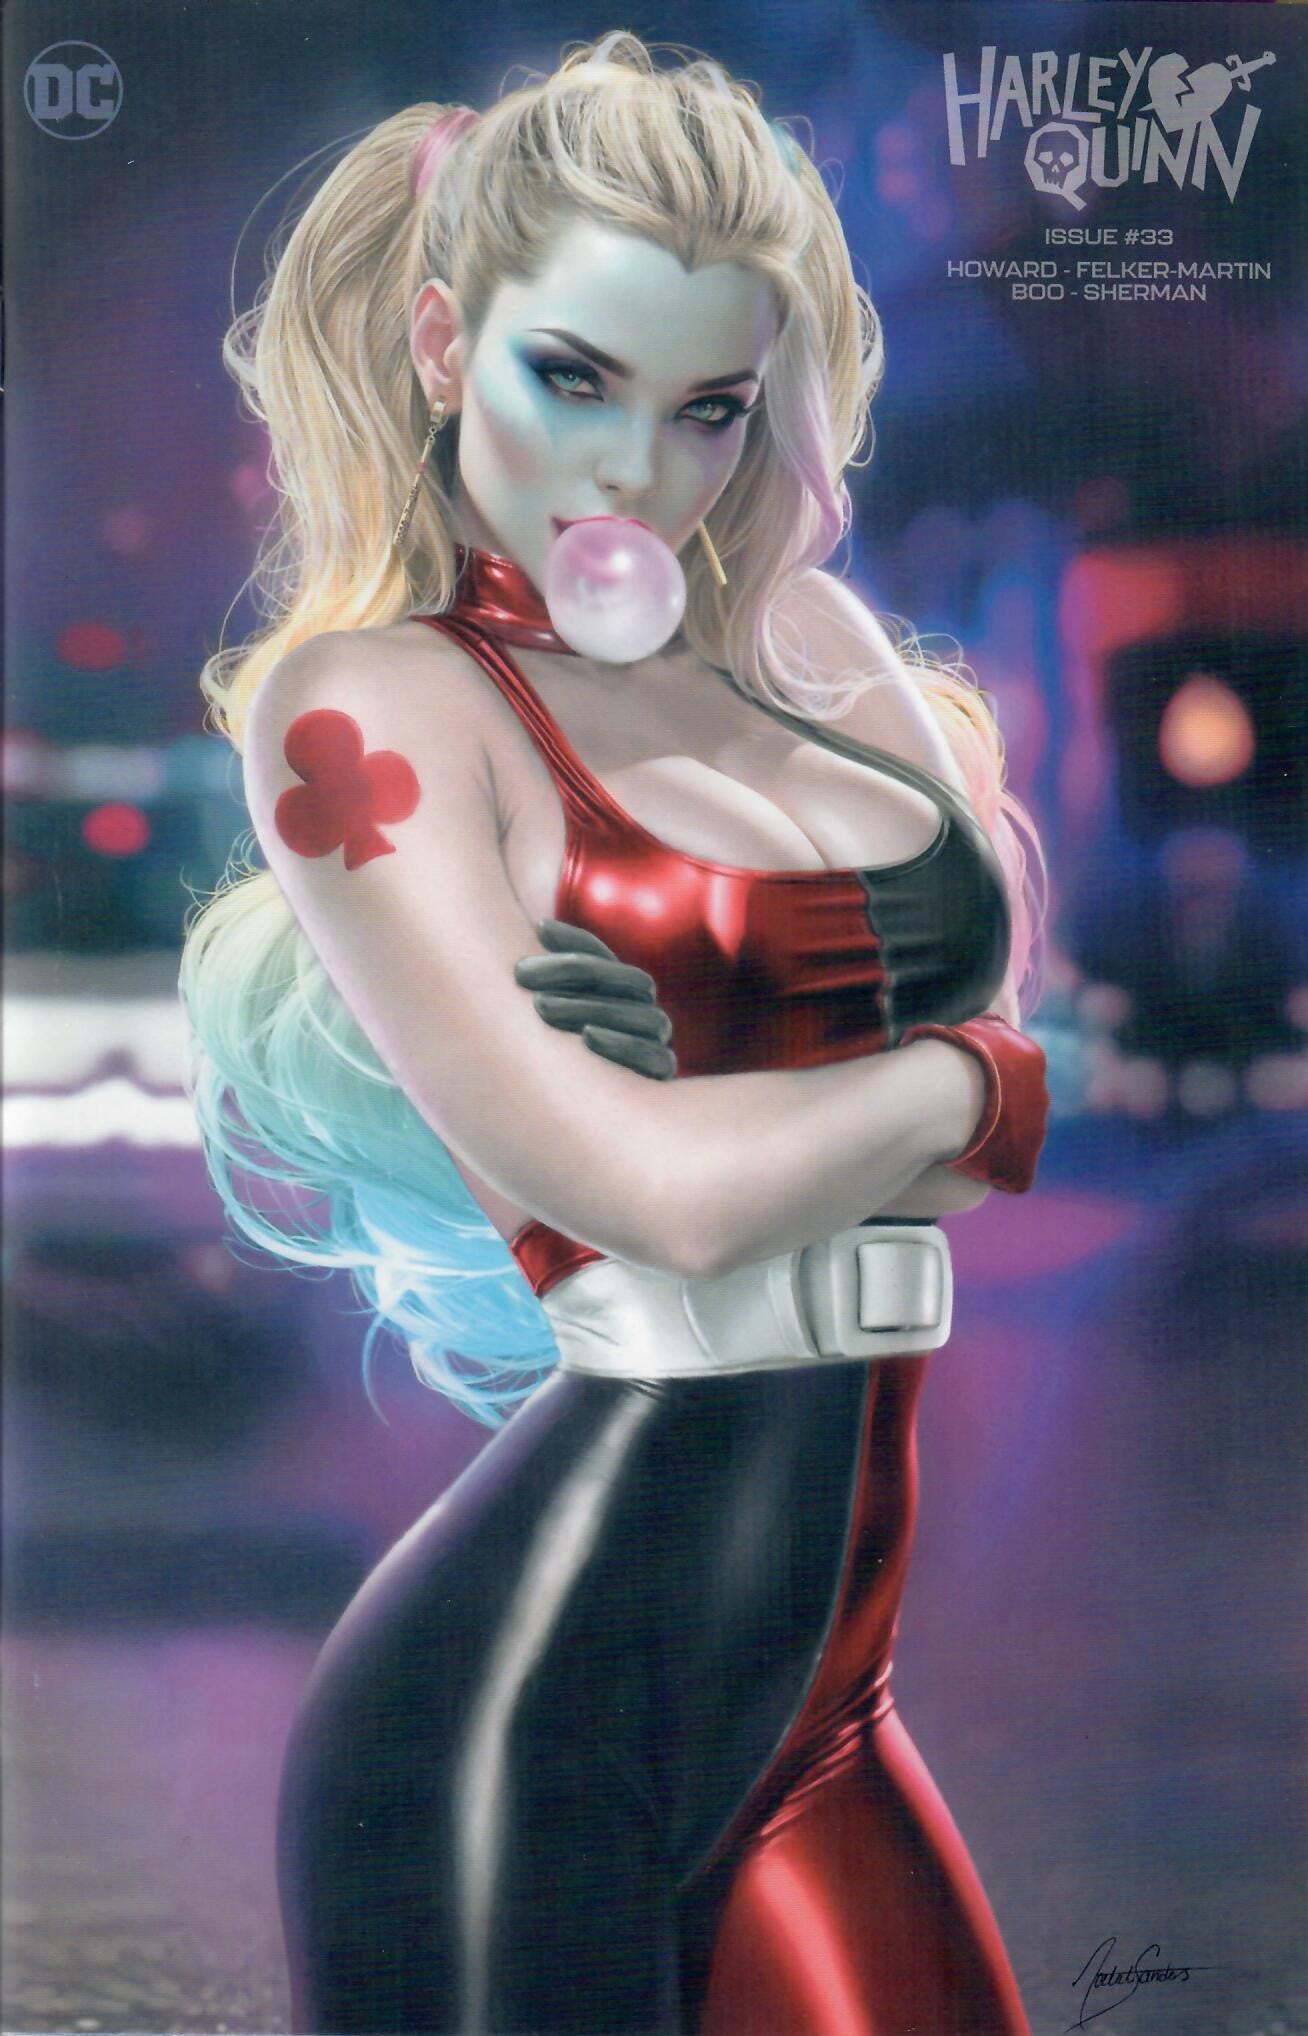 HARLEY QUINN #33 NATALI SANDERS VIRGIN VARIANT LIMITED TO 600 COPIES WITH NUMBERED COA CGC SS PREORDER & FREE RAW MINIMAL TRADE DRESS VARIANT LIMITED TO 1500 COPIES